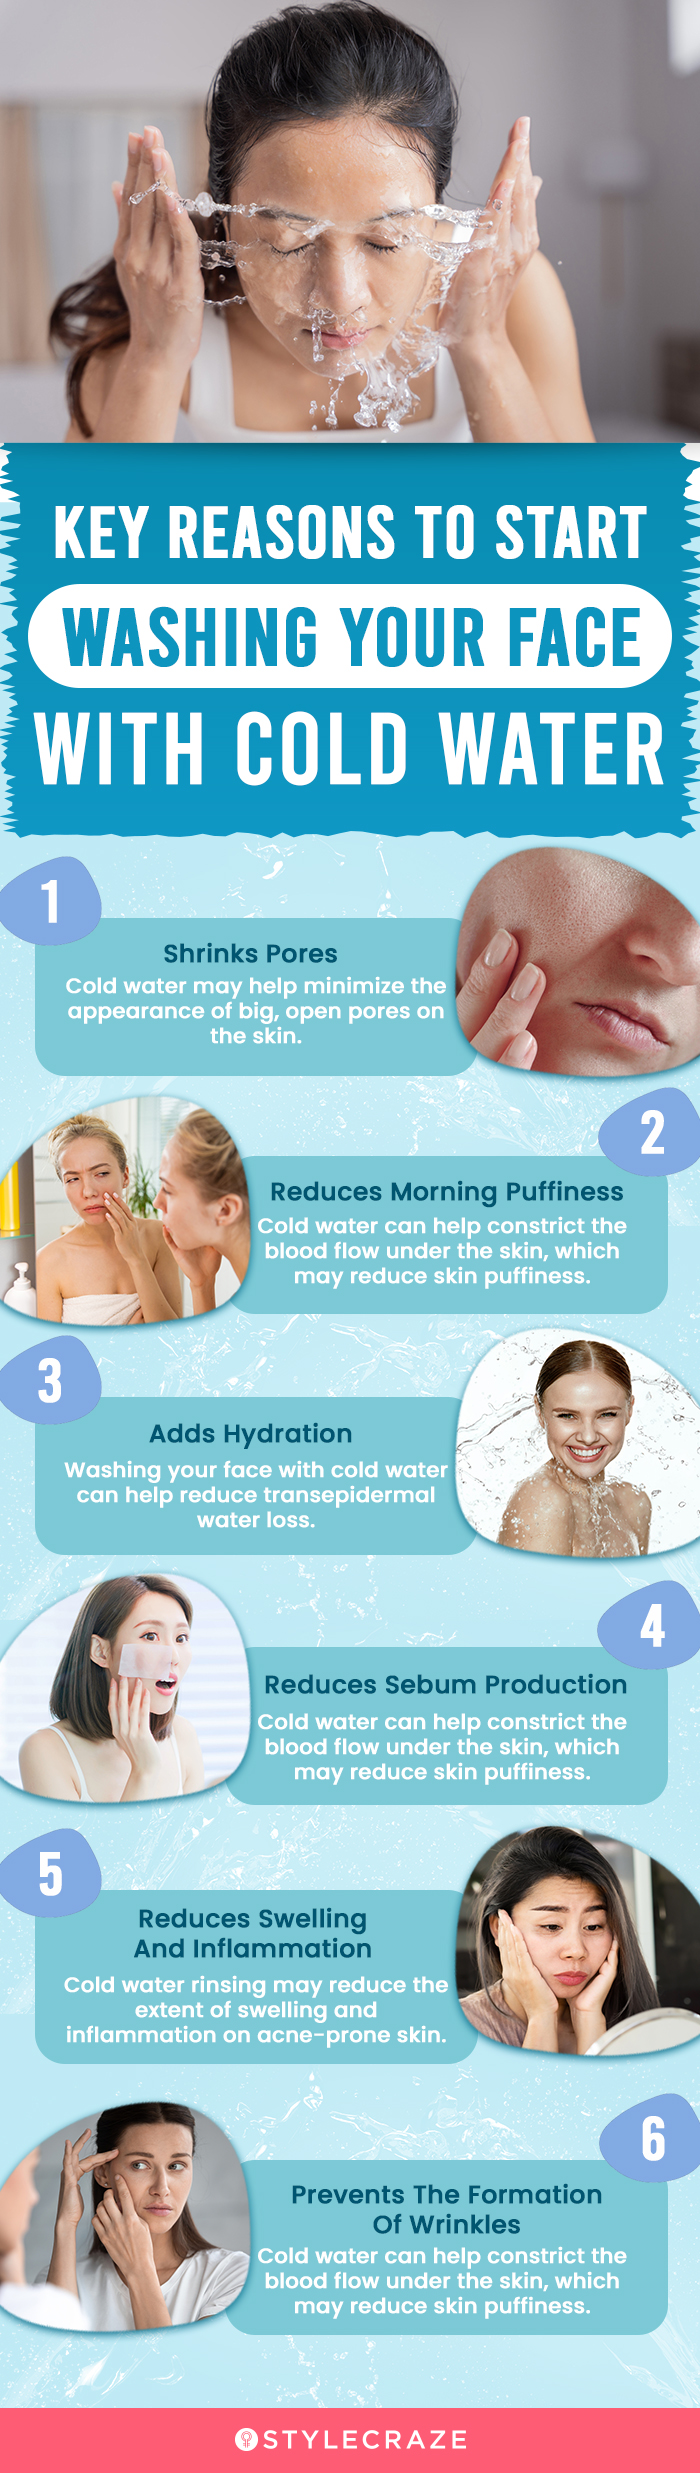 Health Benefits of Submerging Your Face in Ice Water